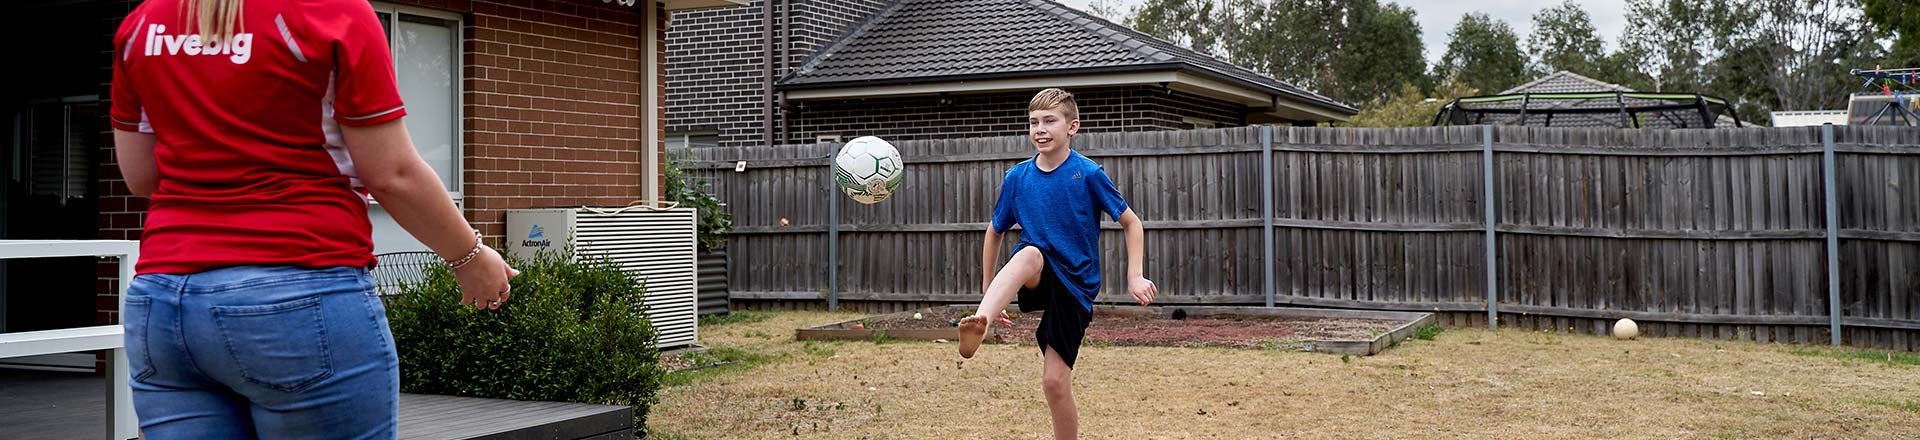 Boy with disability kicking a ball